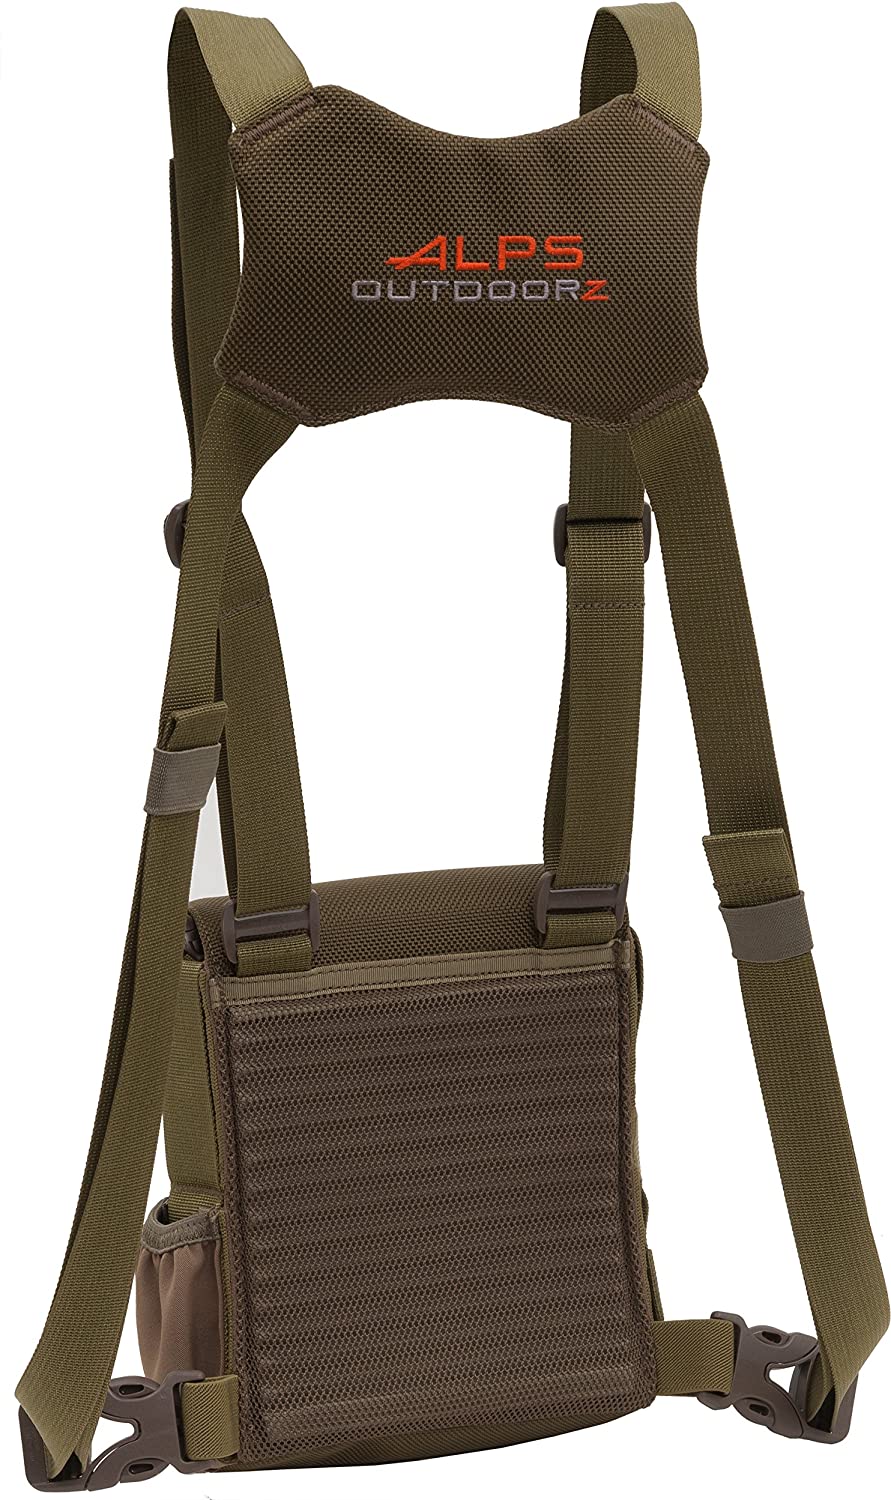 ALPS OutdoorZ Extreme Bino Harness X, Coyote Brown (X-Large) - AL9901799